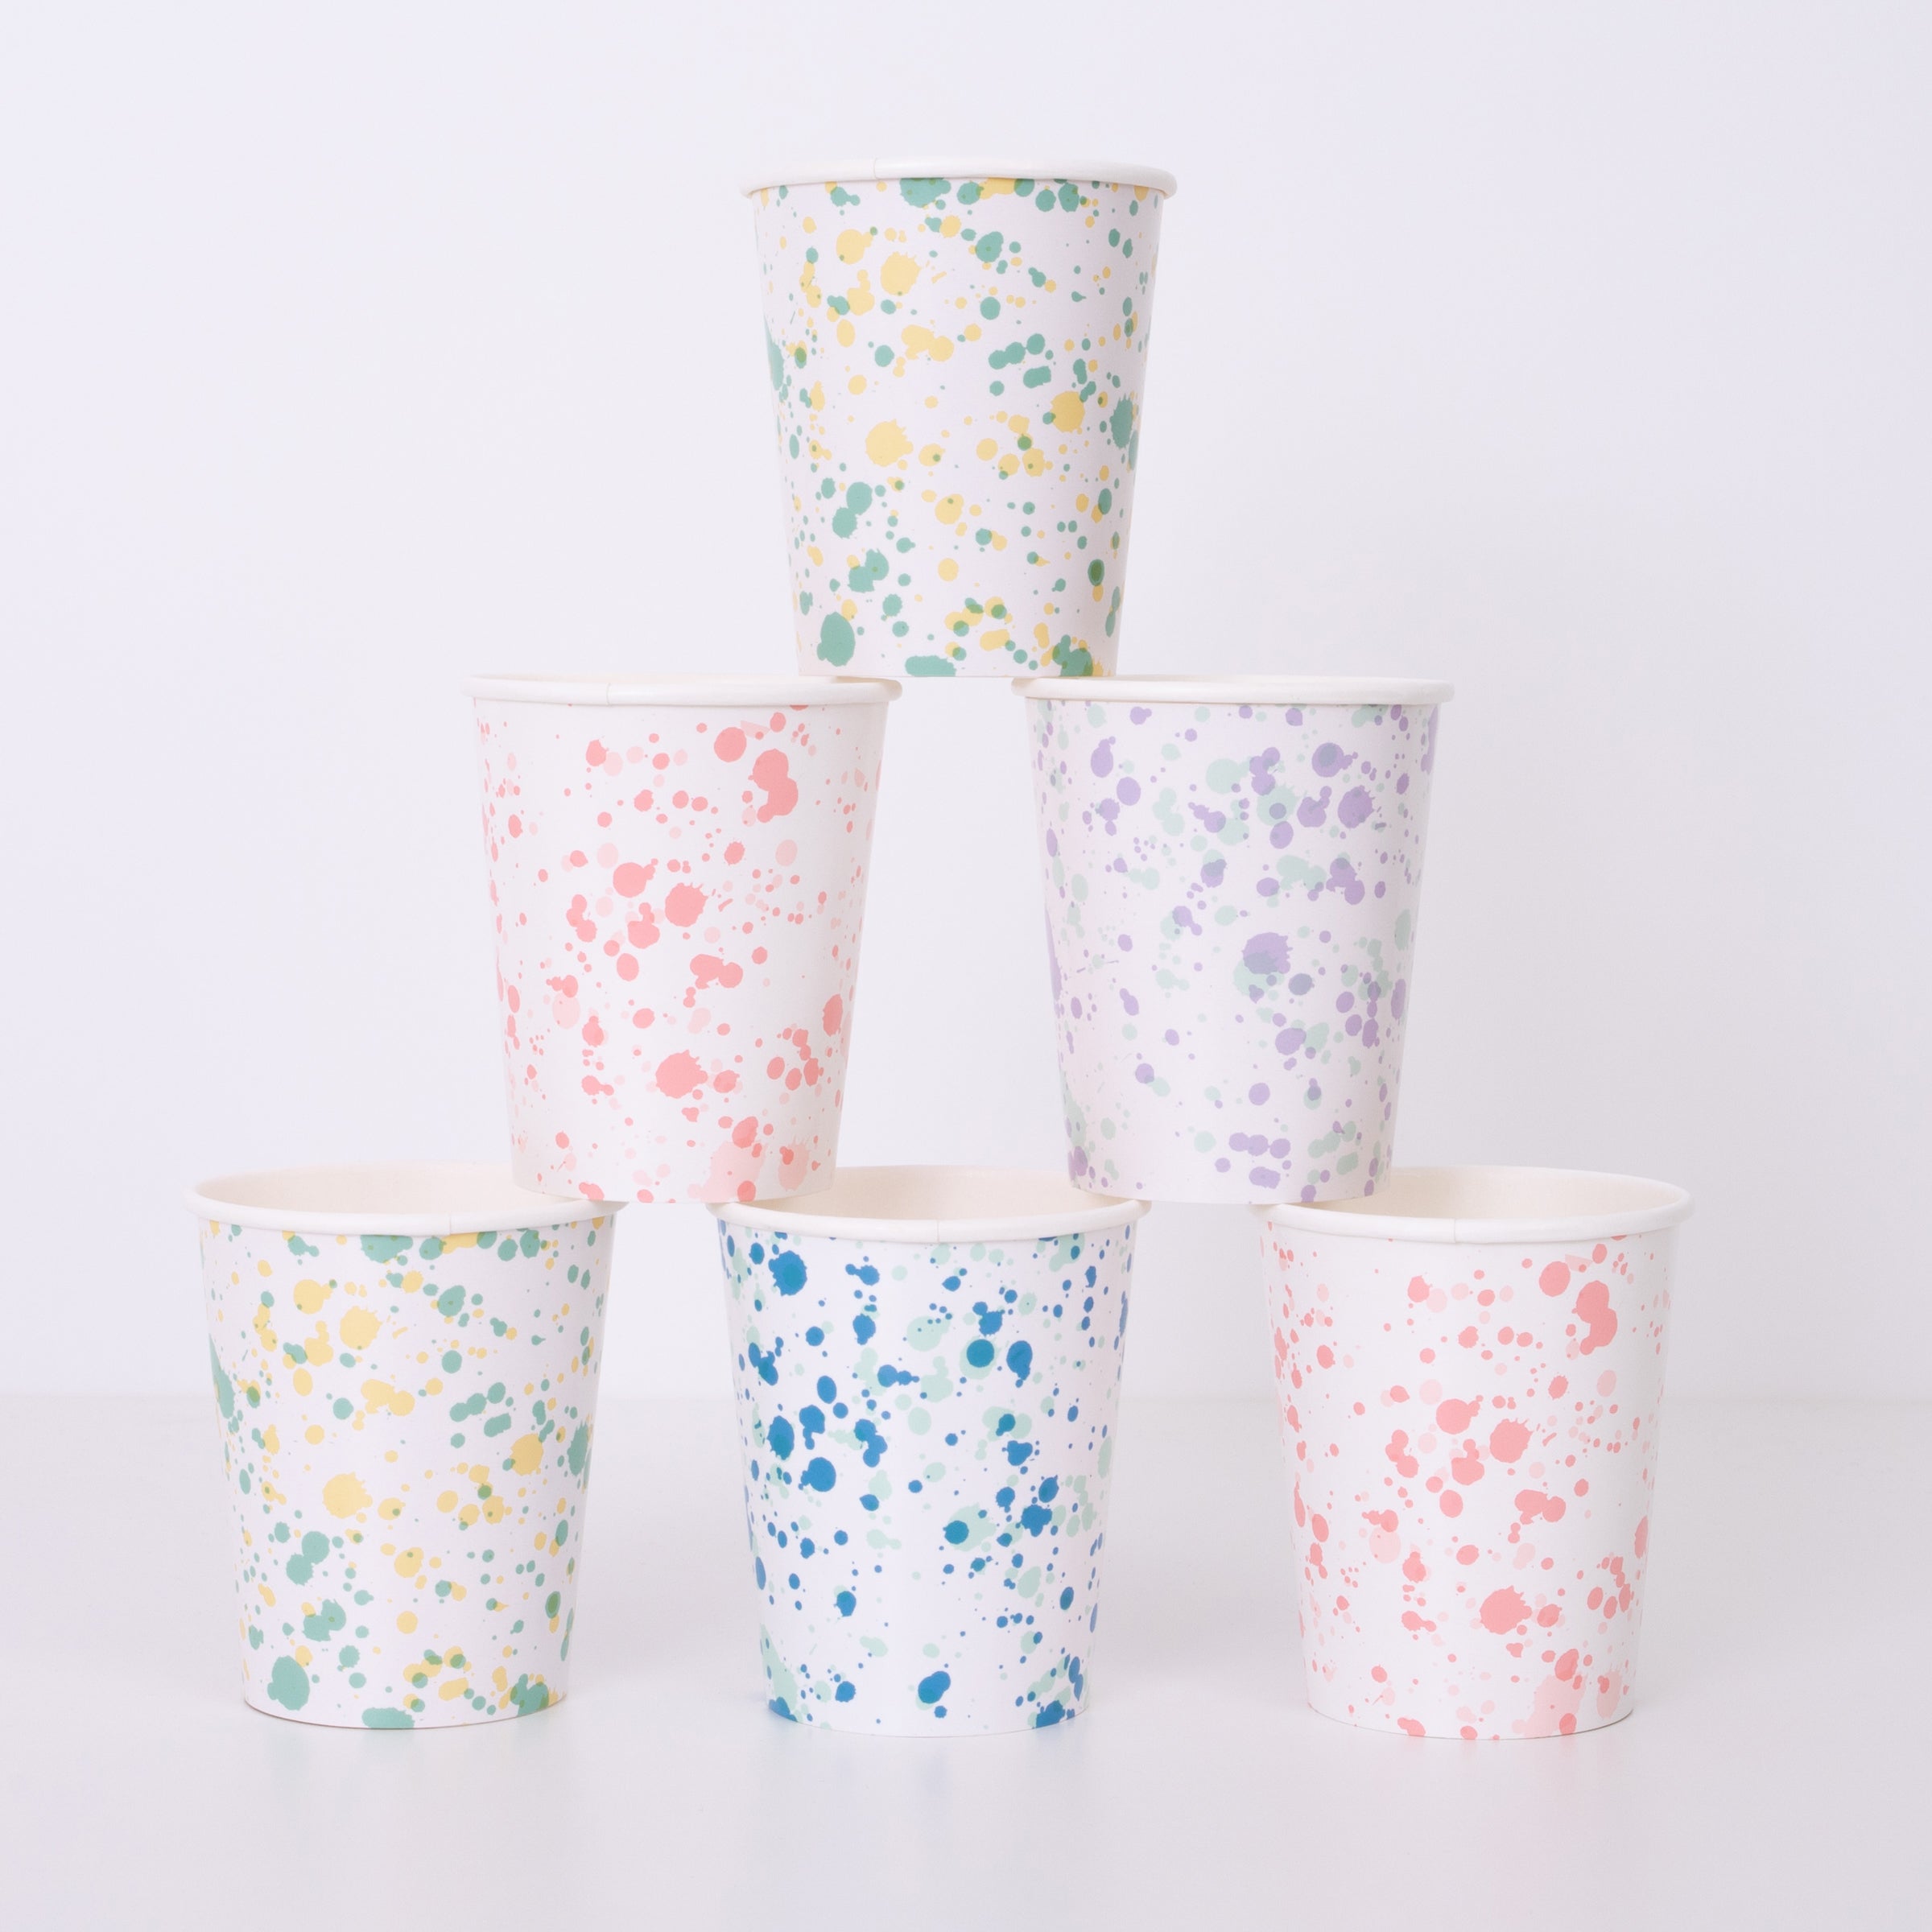 Eco-friendly Terrazzo Print Paper Cups, Party Paper Cups, Terrazzo Print  Cups, Eco-friendly Tableware, Stylish Paper Cups 